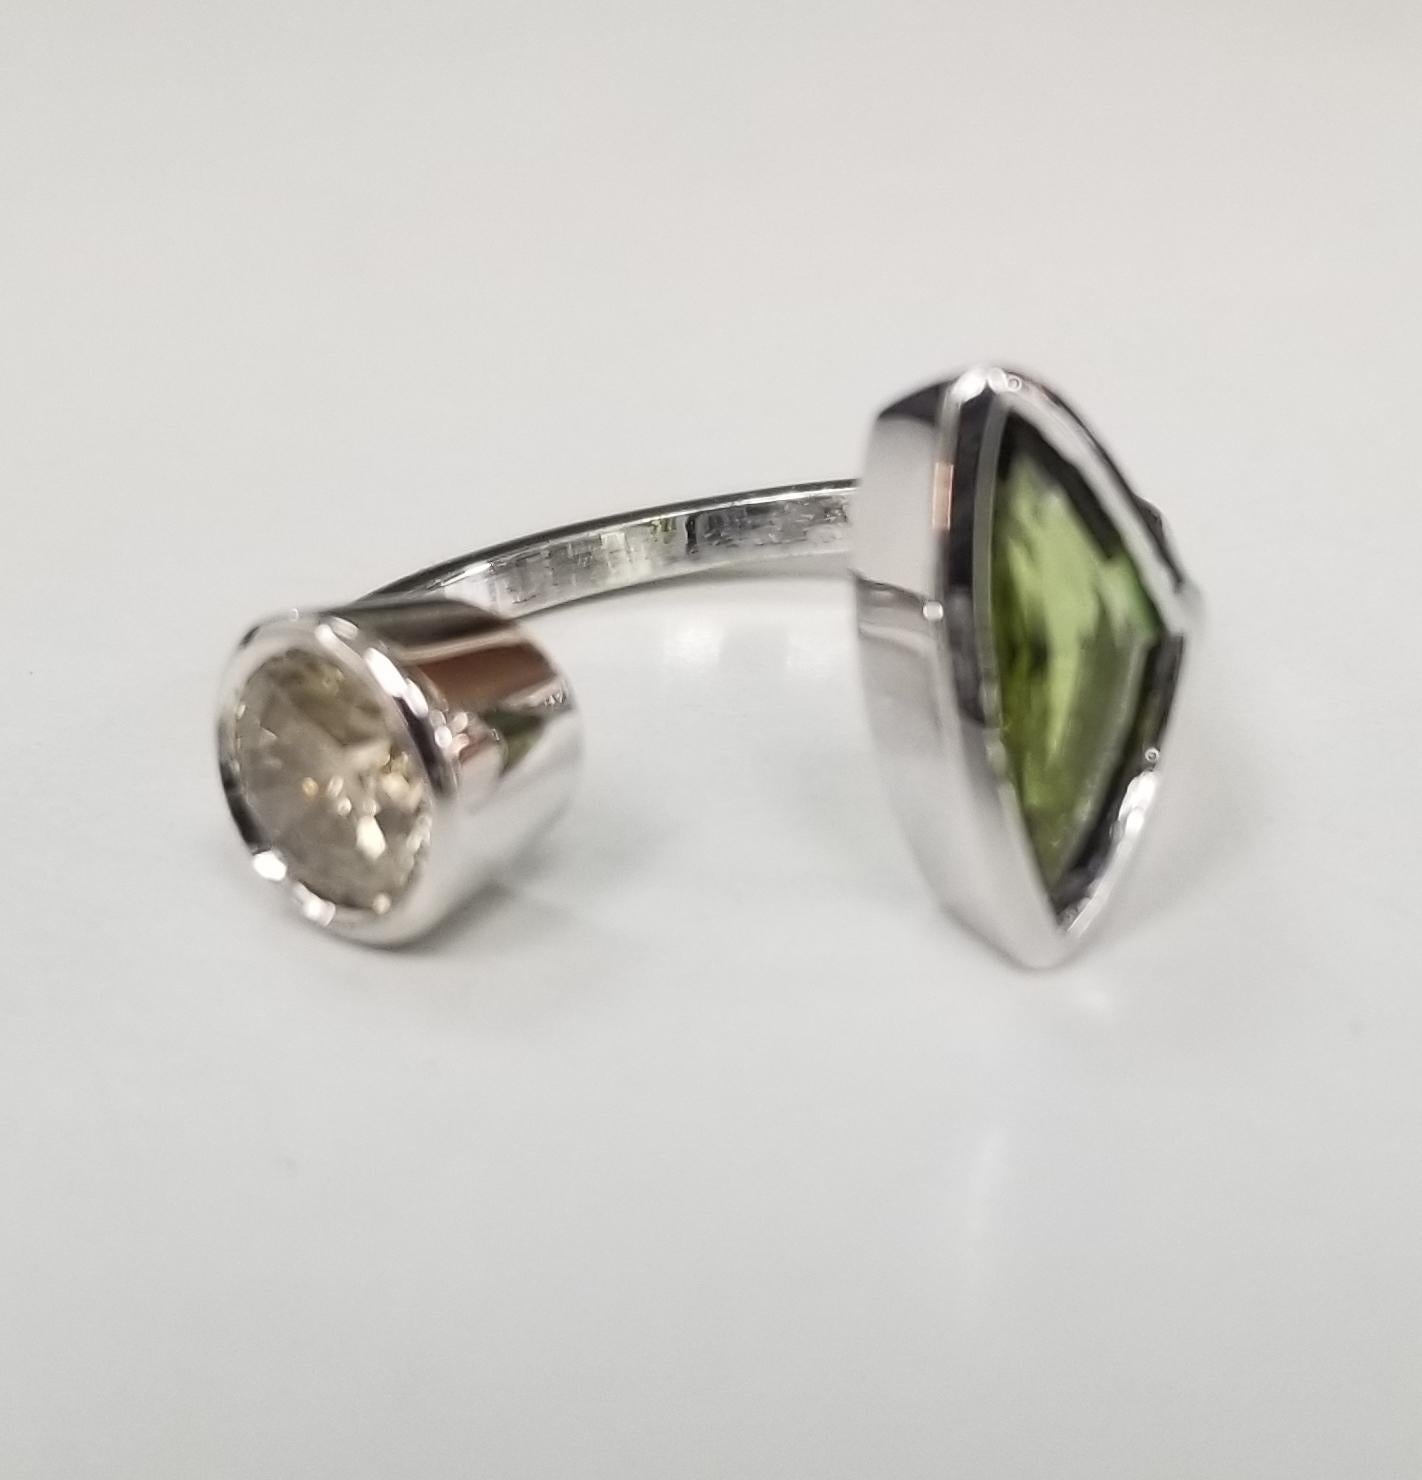 14K White Gold Tourmaline and Topaz split ring
Specifications:
    MAIN stone:   Diamond round .73cts.
    Additional stones:  Tourmaline .73cts.
    metal: 14K WHITE GOLD
    type: RING
    weight: 4.5 GRS 
    size: 6.25 US
*Pick your stones and